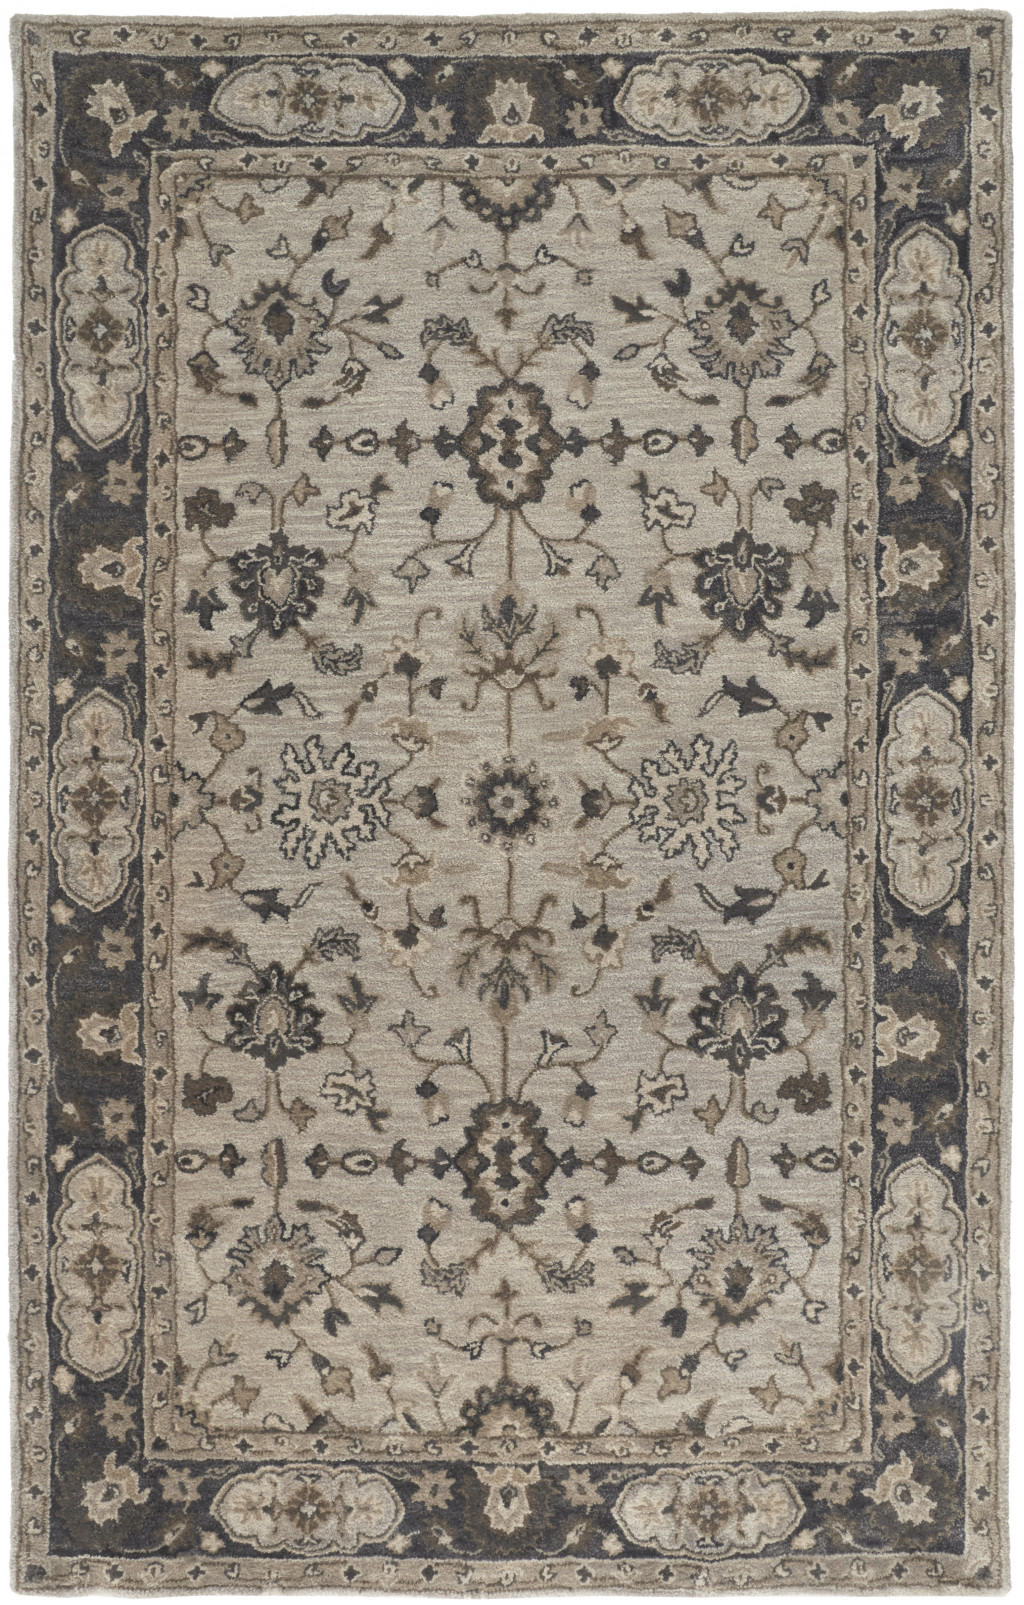 4' X 6' Gray Ivory And Taupe Wool Floral Tufted Handmade Stain Resistant Area Rug-511272-1